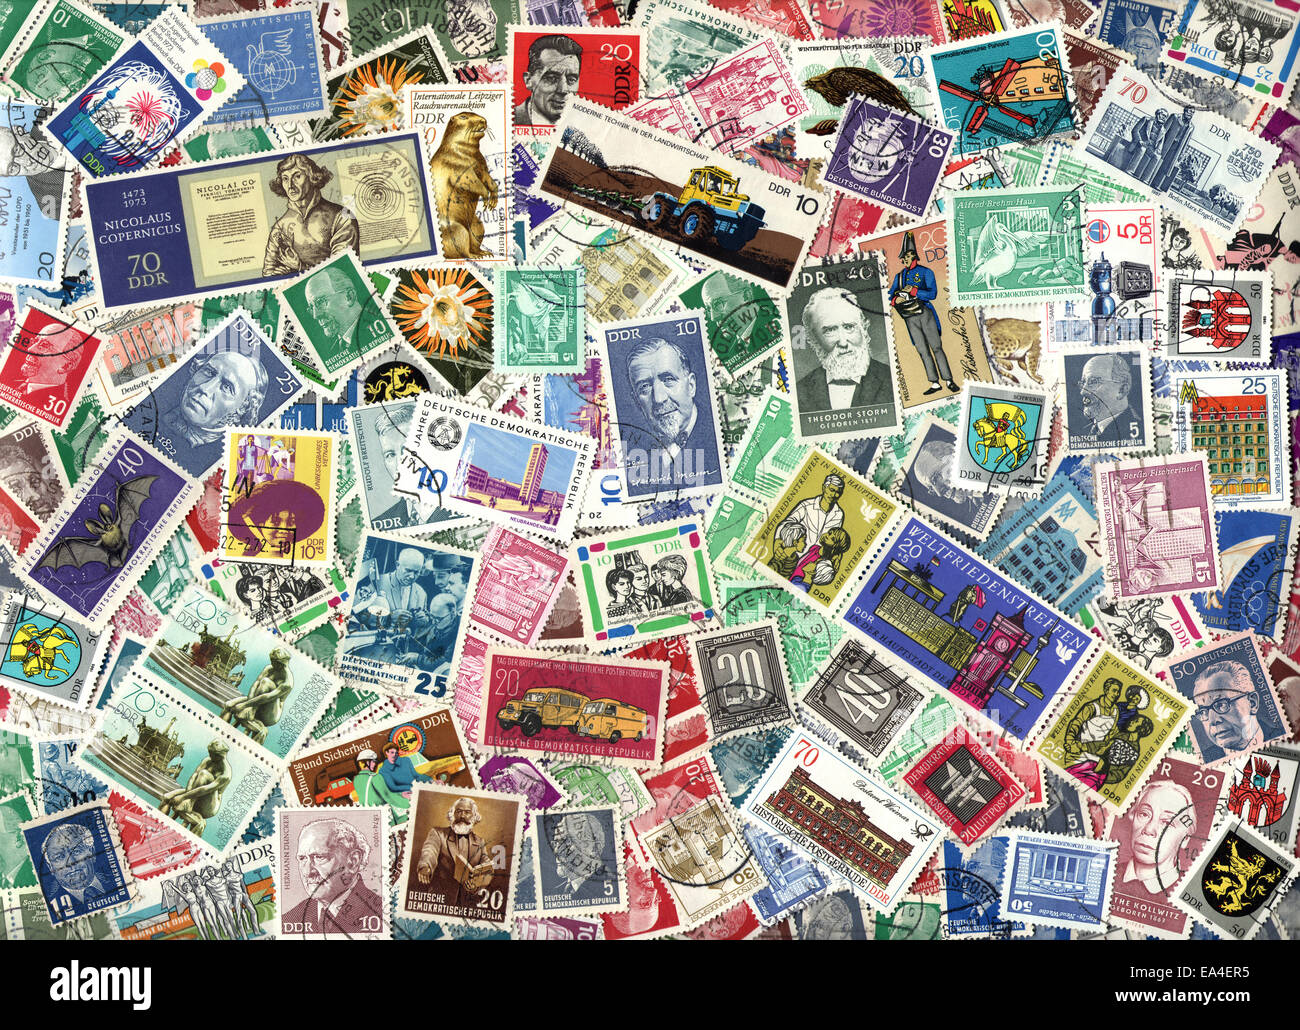 Background of the postage stamps issued in East Germany (GDR) Stock Photo